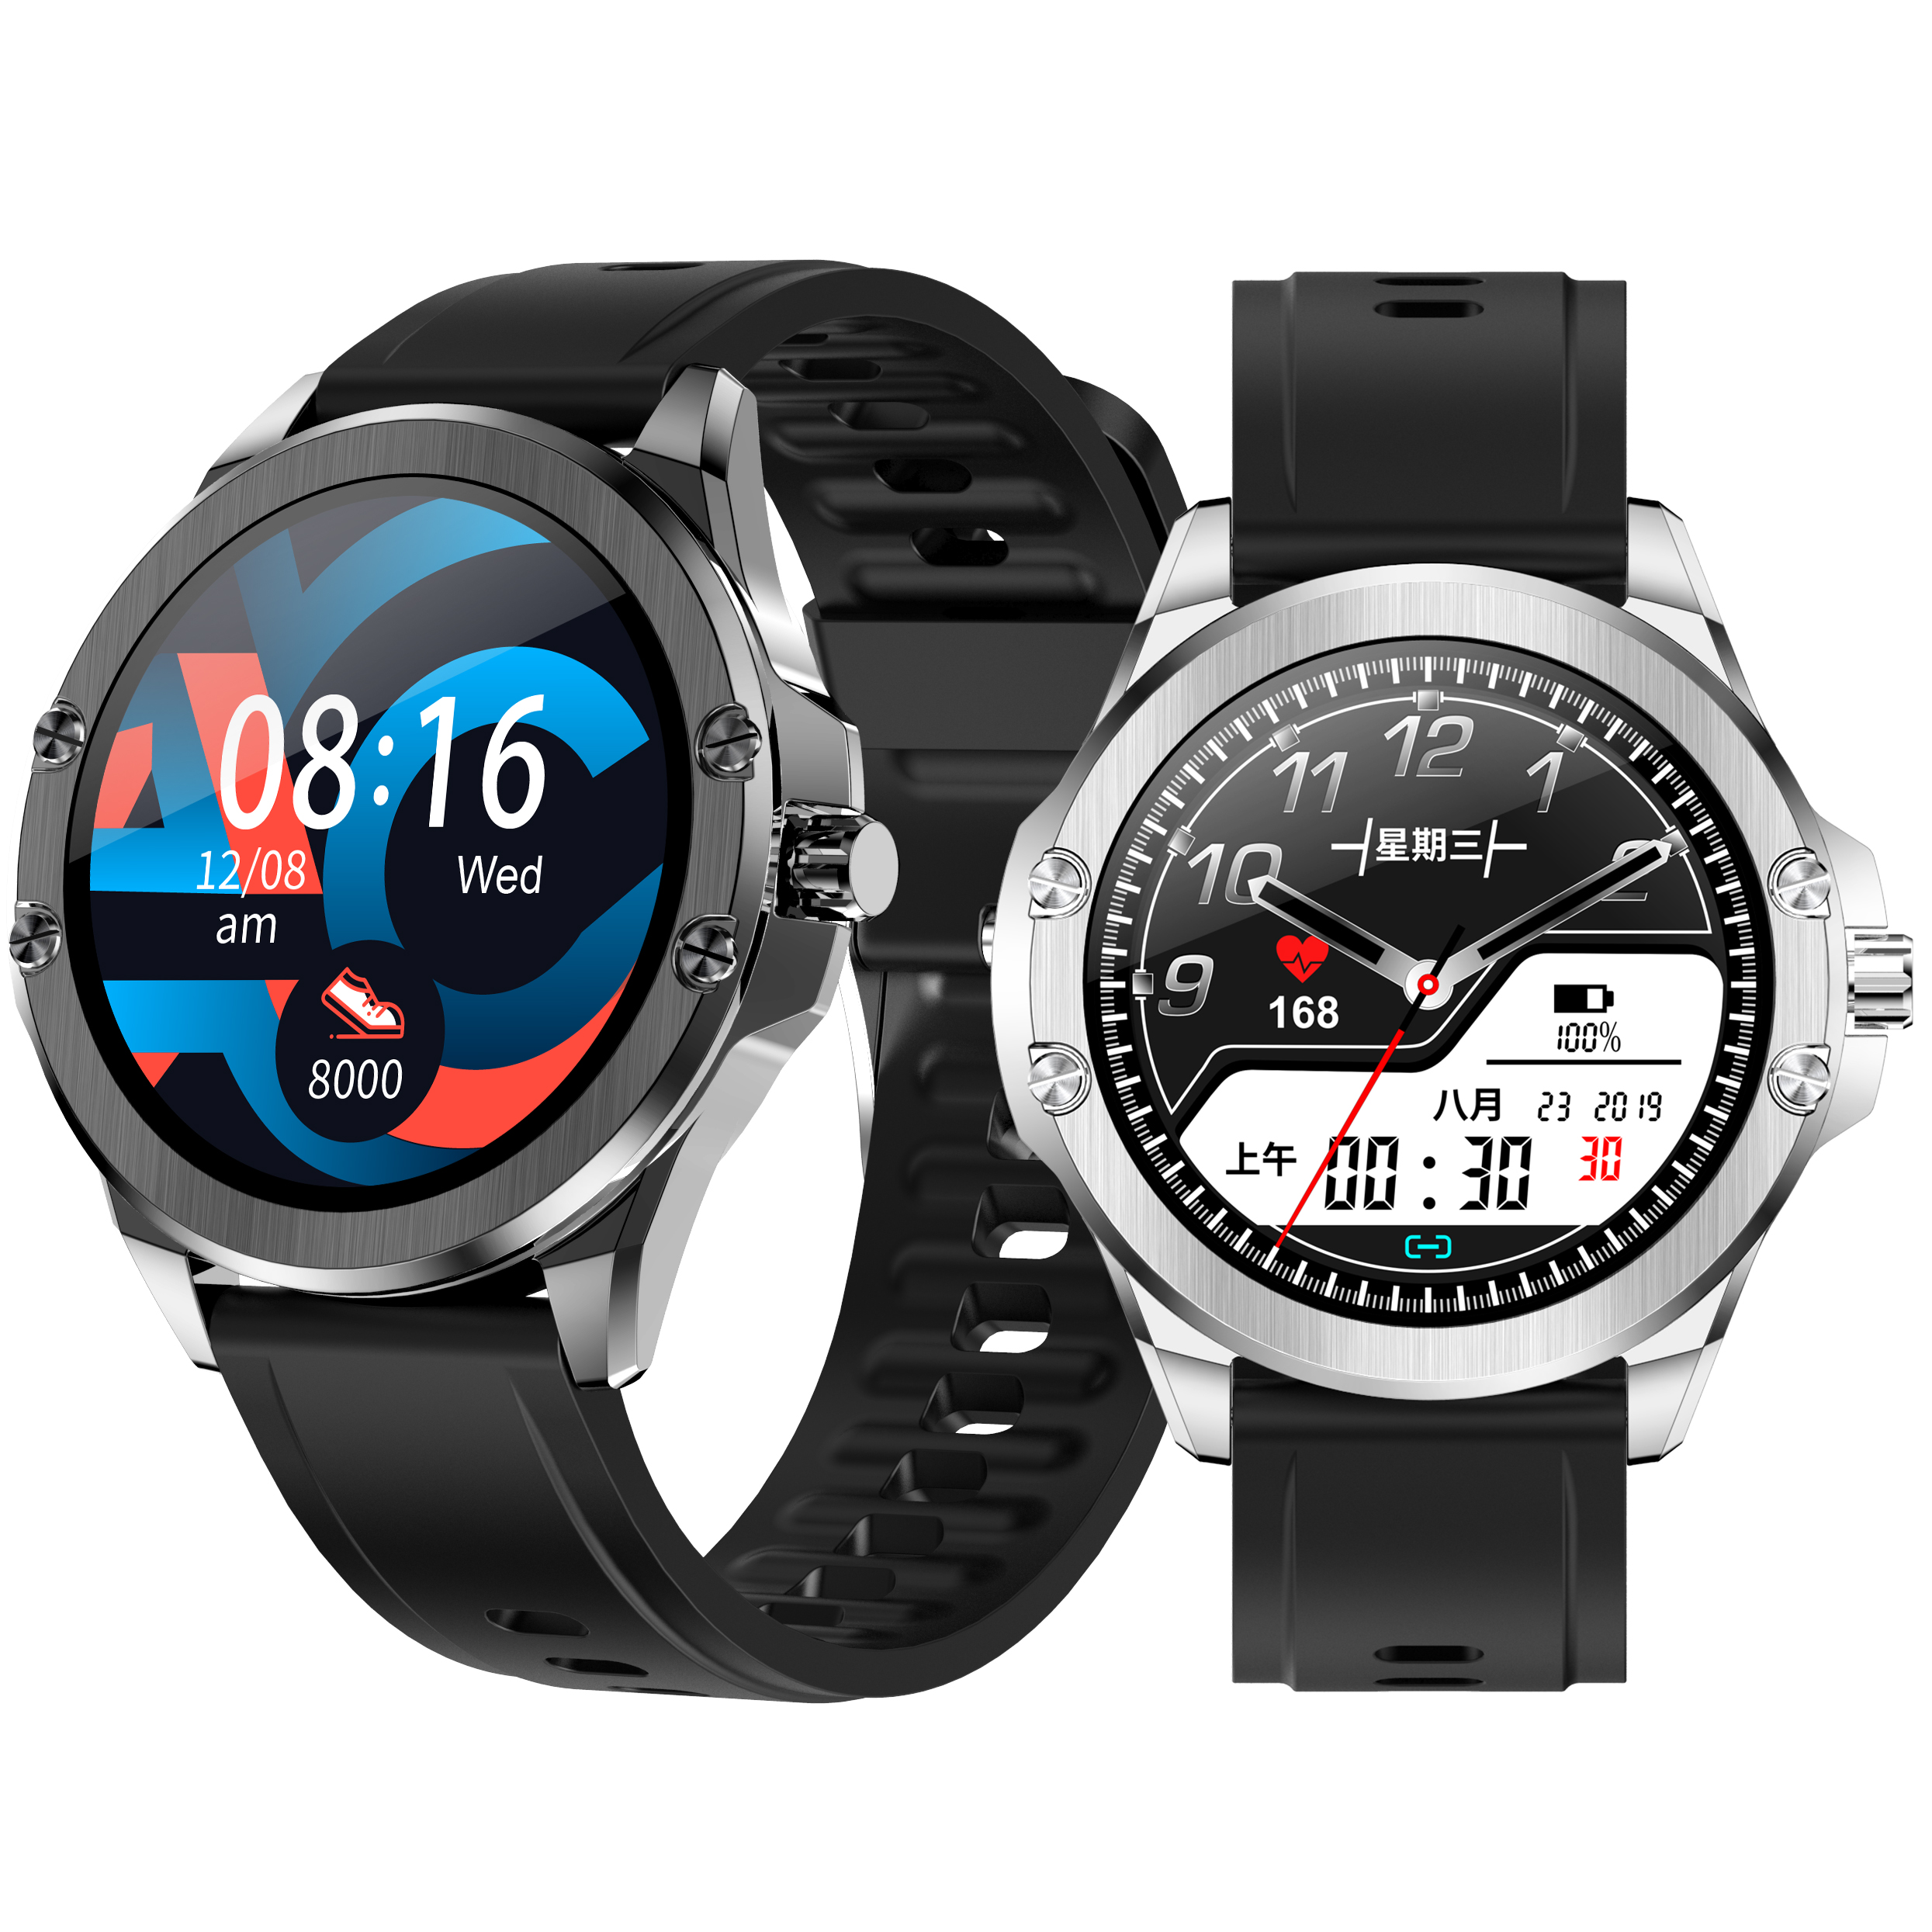 Find SENBONO S11 1 28 Full Touch Screen Heart Rate Monitor Blood Pressure Measurement Fitness Tracker IP68 Waterproof Smart Watch for Sale on Gipsybee.com with cryptocurrencies